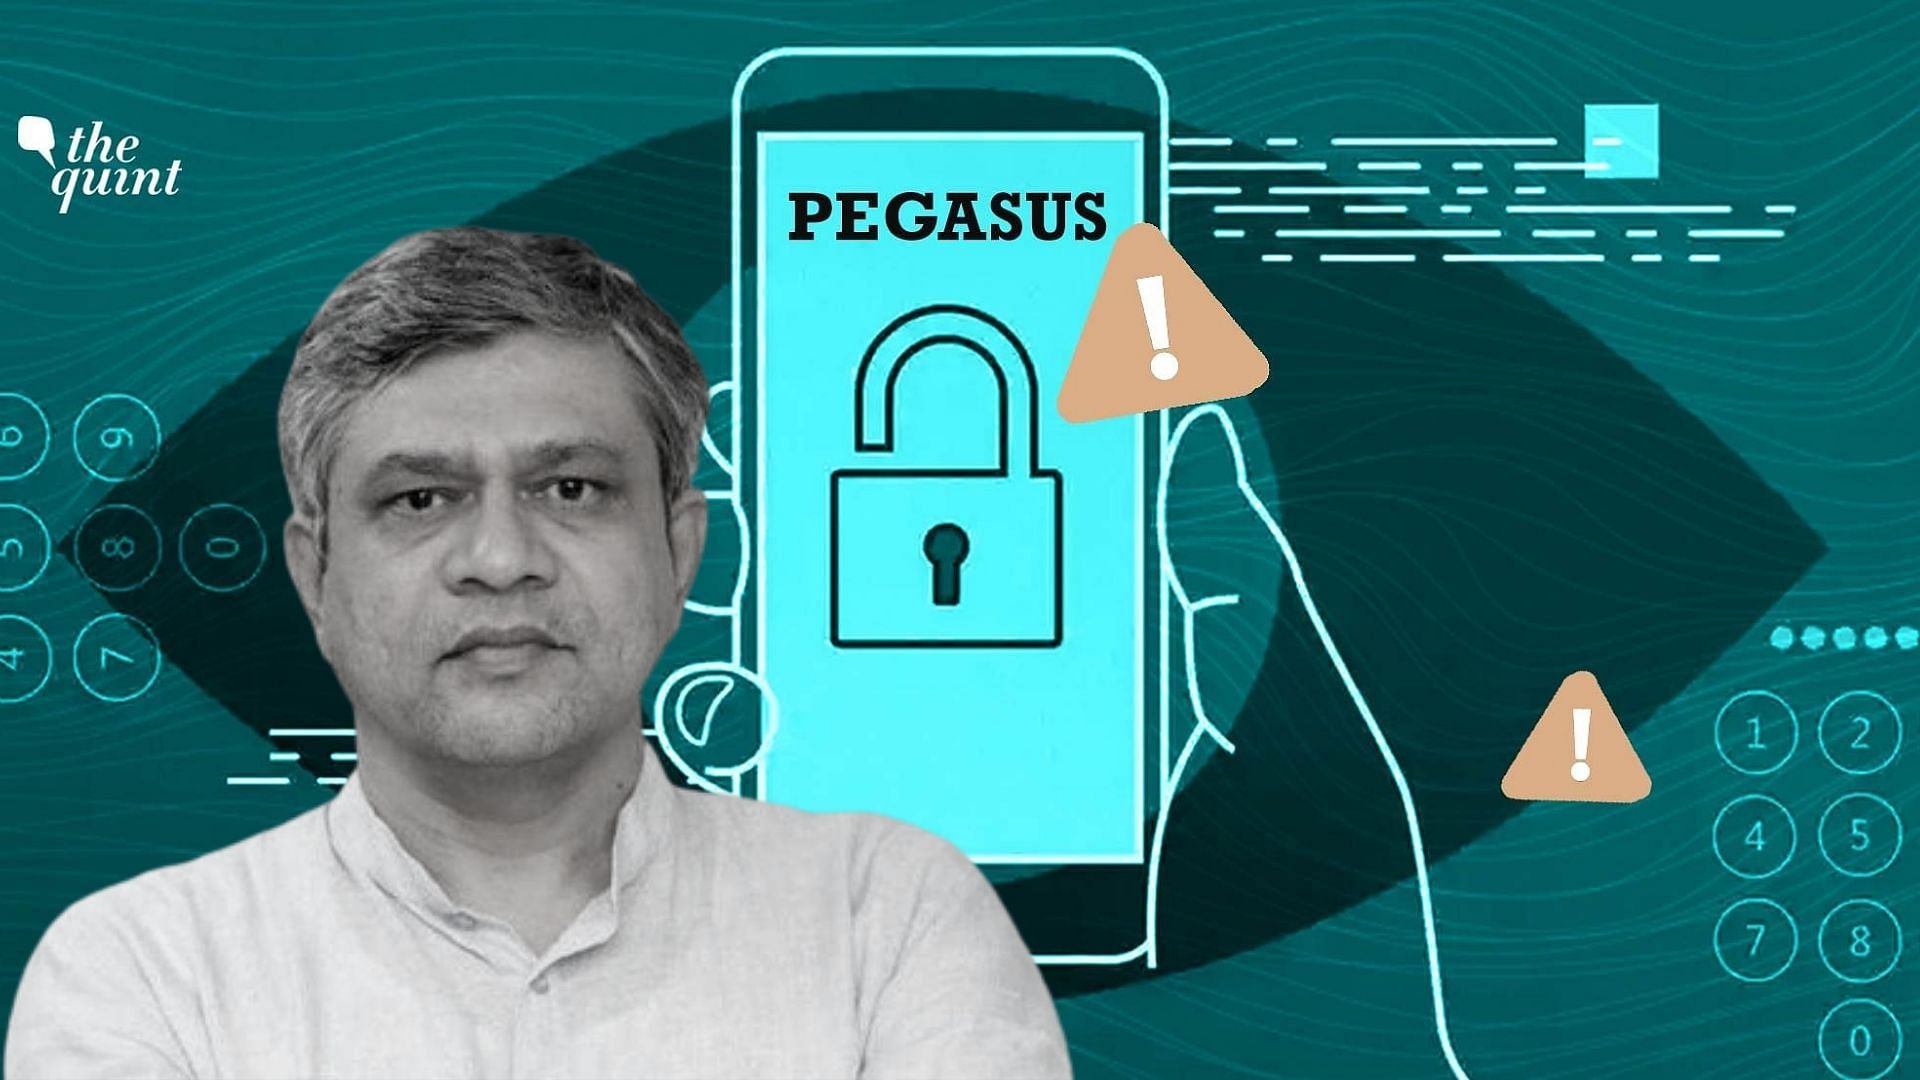 <div class="paragraphs"><p>Information and Technology minister Ashwini Vaishnaw dismissed recent reports of government’s surveillance of some ministers, journalists, activists and others using the Israeli company NSO’s Pegasus software.</p></div>